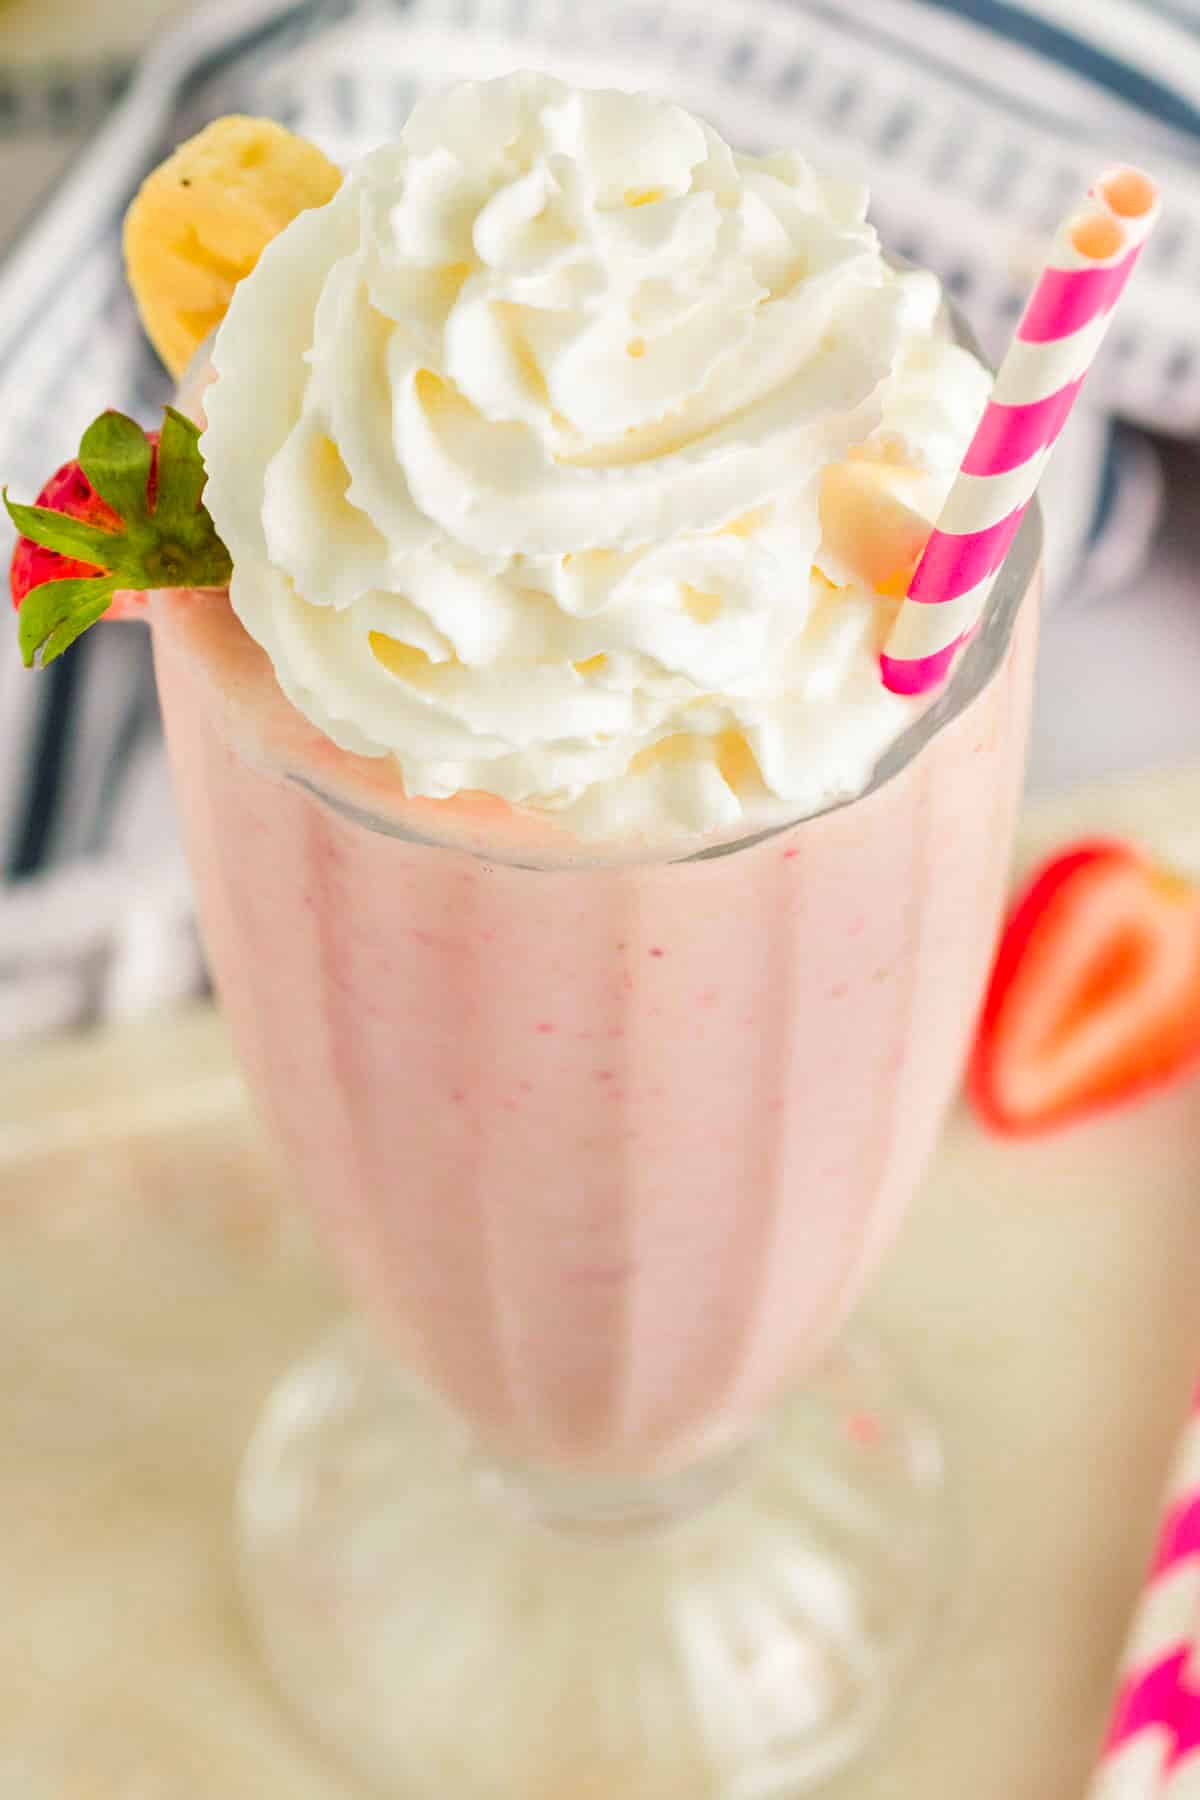 Strawberry Banana Milkshake with whipped cream on top and a striped pink and white straw. 